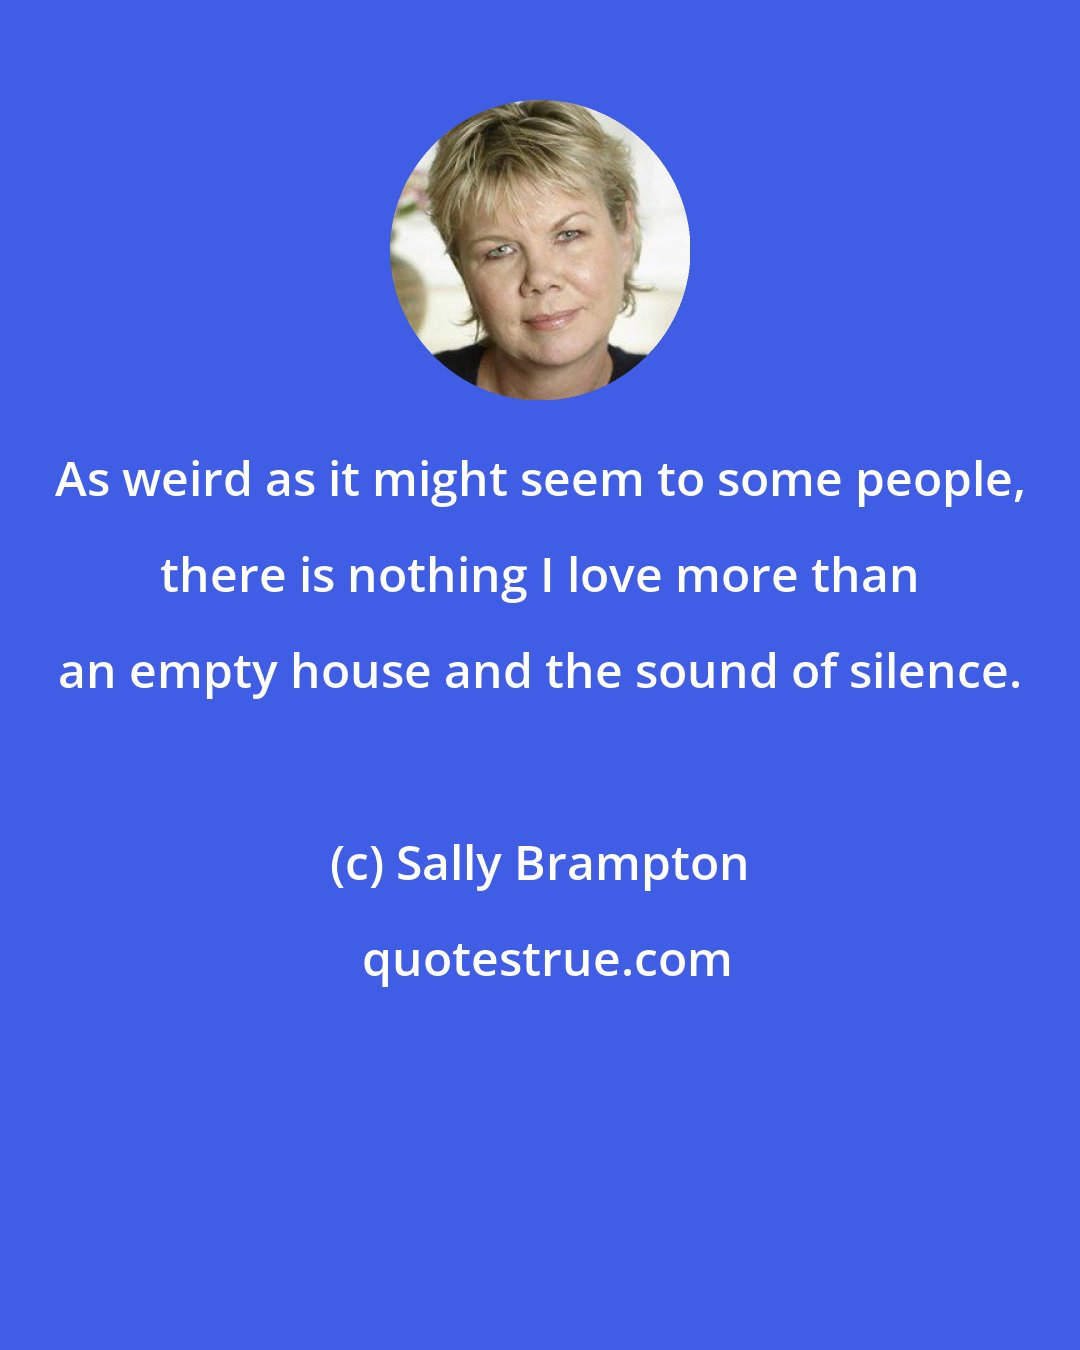 Sally Brampton: As weird as it might seem to some people, there is nothing I love more than an empty house and the sound of silence.